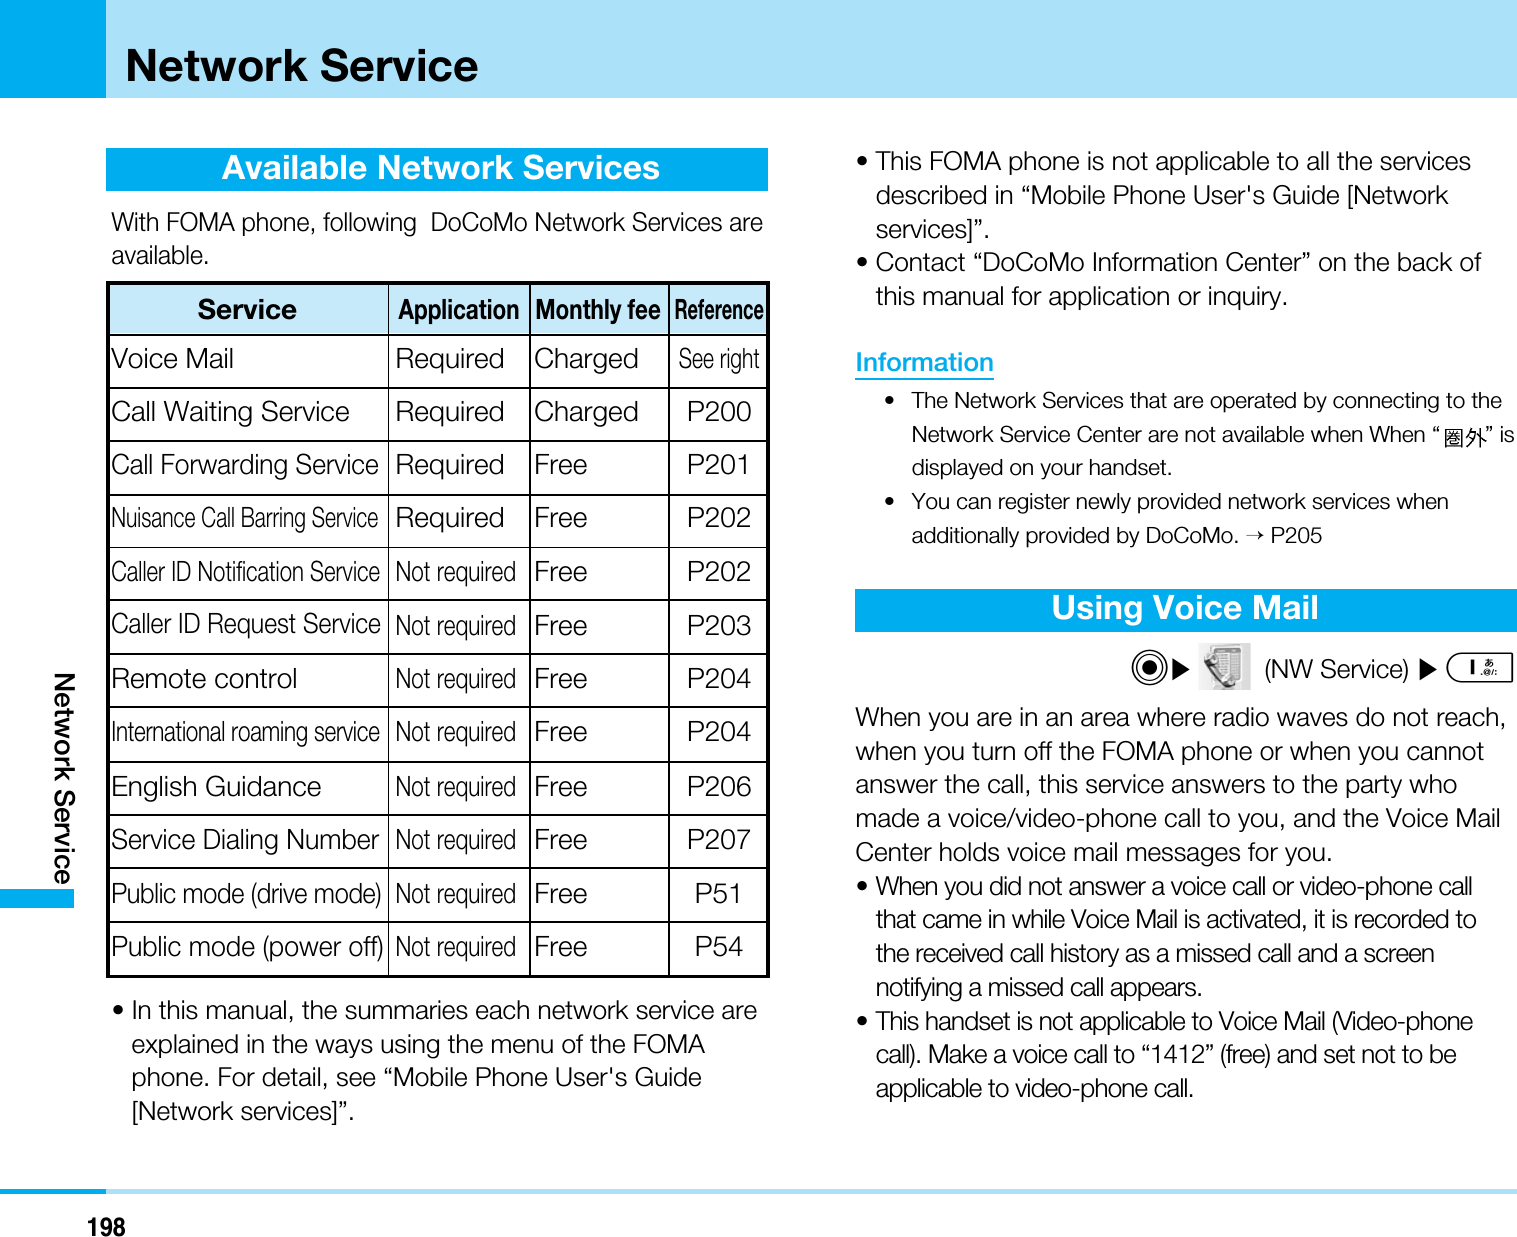 Available Network ServicesWith FOMA phone, following  DoCoMo Network Services areavailable.• In this manual, the summaries each network service areexplained in the ways using the menu of the FOMAphone. For detail, see “Mobile Phone User&apos;s Guide[Network services]”.• This FOMA phone is not applicable to all the servicesdescribed in “Mobile Phone User&apos;s Guide [Networkservices]”.• Contact “DoCoMo Information Center” on the back ofthis manual for application or inquiry.Information• The Network Services that are operated by connecting to theNetwork Service Center are not available when When “ ” isdisplayed on your handset.• You can register newly provided network services whenadditionally provided by DoCoMo. &gt;P205Using Voice MailC](NW Service) ]1When you are in an area where radio waves do not reach,when you turn off the FOMA phone or when you cannotanswer the call, this service answers to the party whomade a voice/video-phone call to you, and the Voice MailCenter holds voice mail messages for you.•When you did not answer a voice call or video-phone callthat came in while Voice Mail is activated, it is recorded tothe received call history as a missed call and a screennotifying a missed call appears.•This handset is not applicable to Voice Mail (Video-phonecall). Make a voice call to “1412” (free) and set not to beapplicable to video-phone call.198Network ServiceNetwork ServiceServiceReferenceMonthly feeApplicationVoice MailSee rightChargedRequiredCall Waiting Service P200ChargedRequiredCall Forwarding ServiceP201FreeRequiredNuisance Call Barring ServiceP202FreeRequiredP203FreeNot requiredCaller ID Notification ServiceP202FreeNot requiredRemote controlNot requiredFree P204International roaming service Not requiredFree P204English GuidanceNot requiredFree P206Service Dialing NumberNot requiredFree P207Caller ID Request ServicePublic mode (power off)Not requiredFree P54Public mode (drive mode)Not requiredFree P51